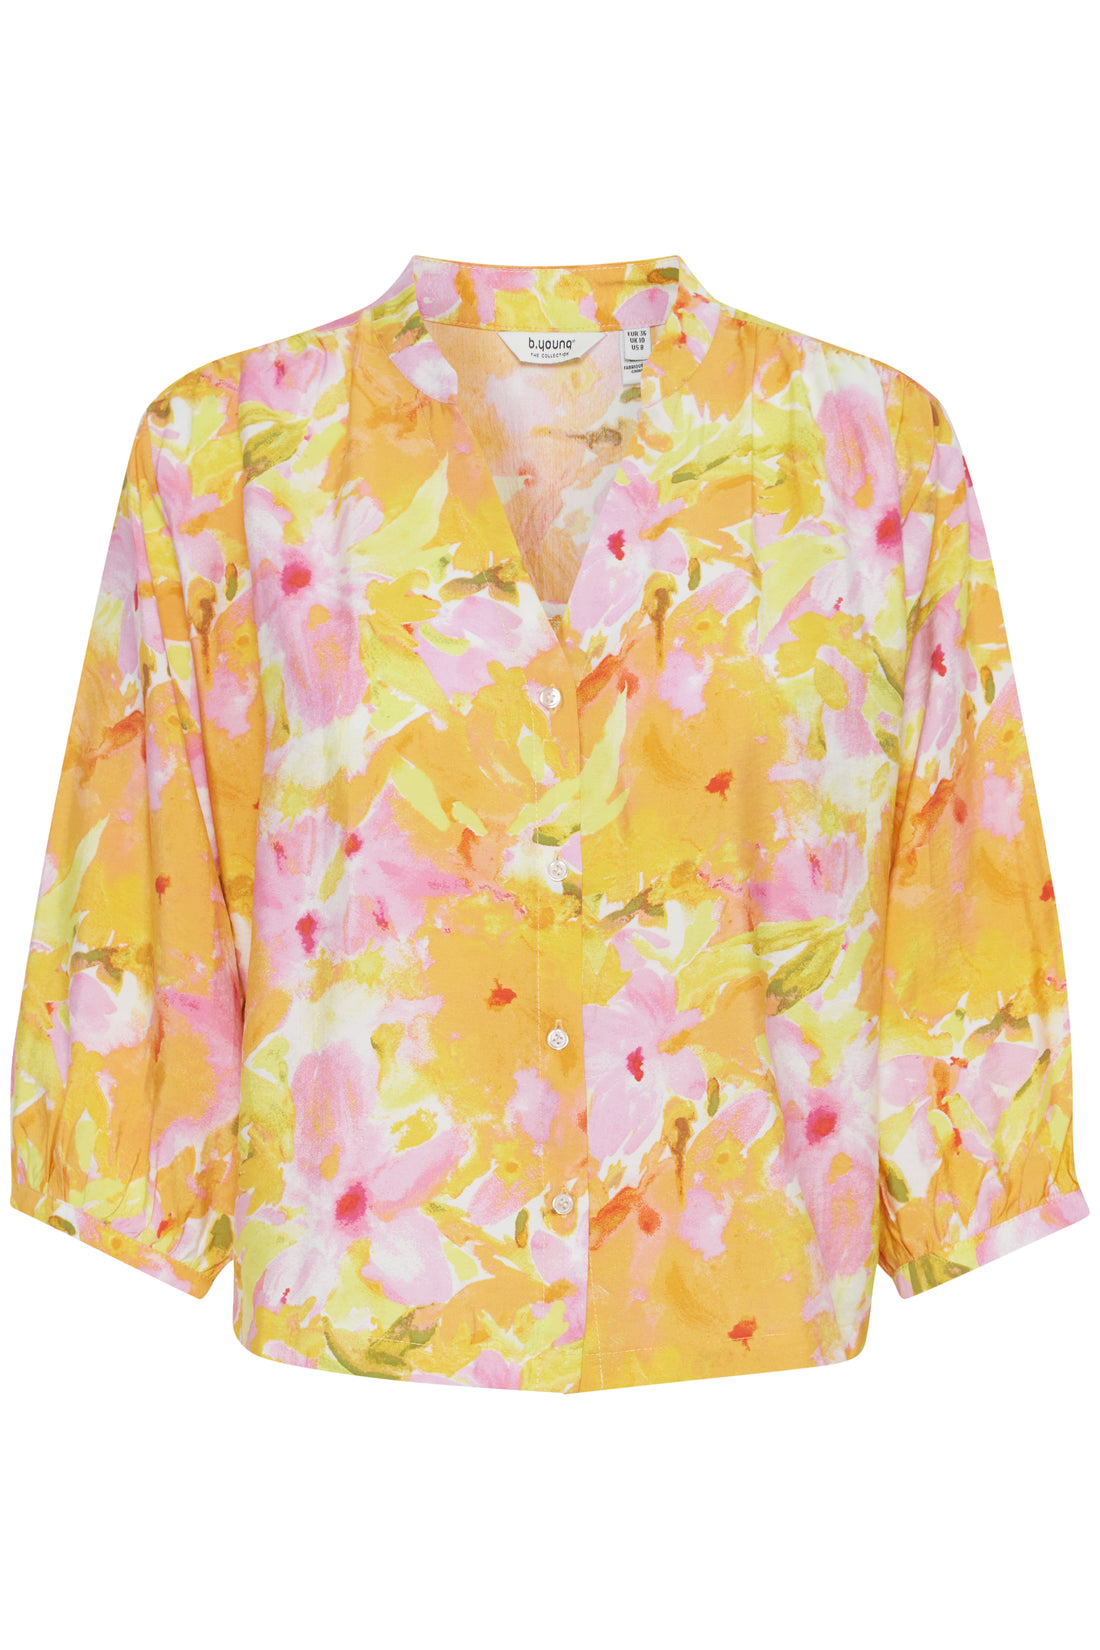 Chemisier Bine Jaune Floral B.Young